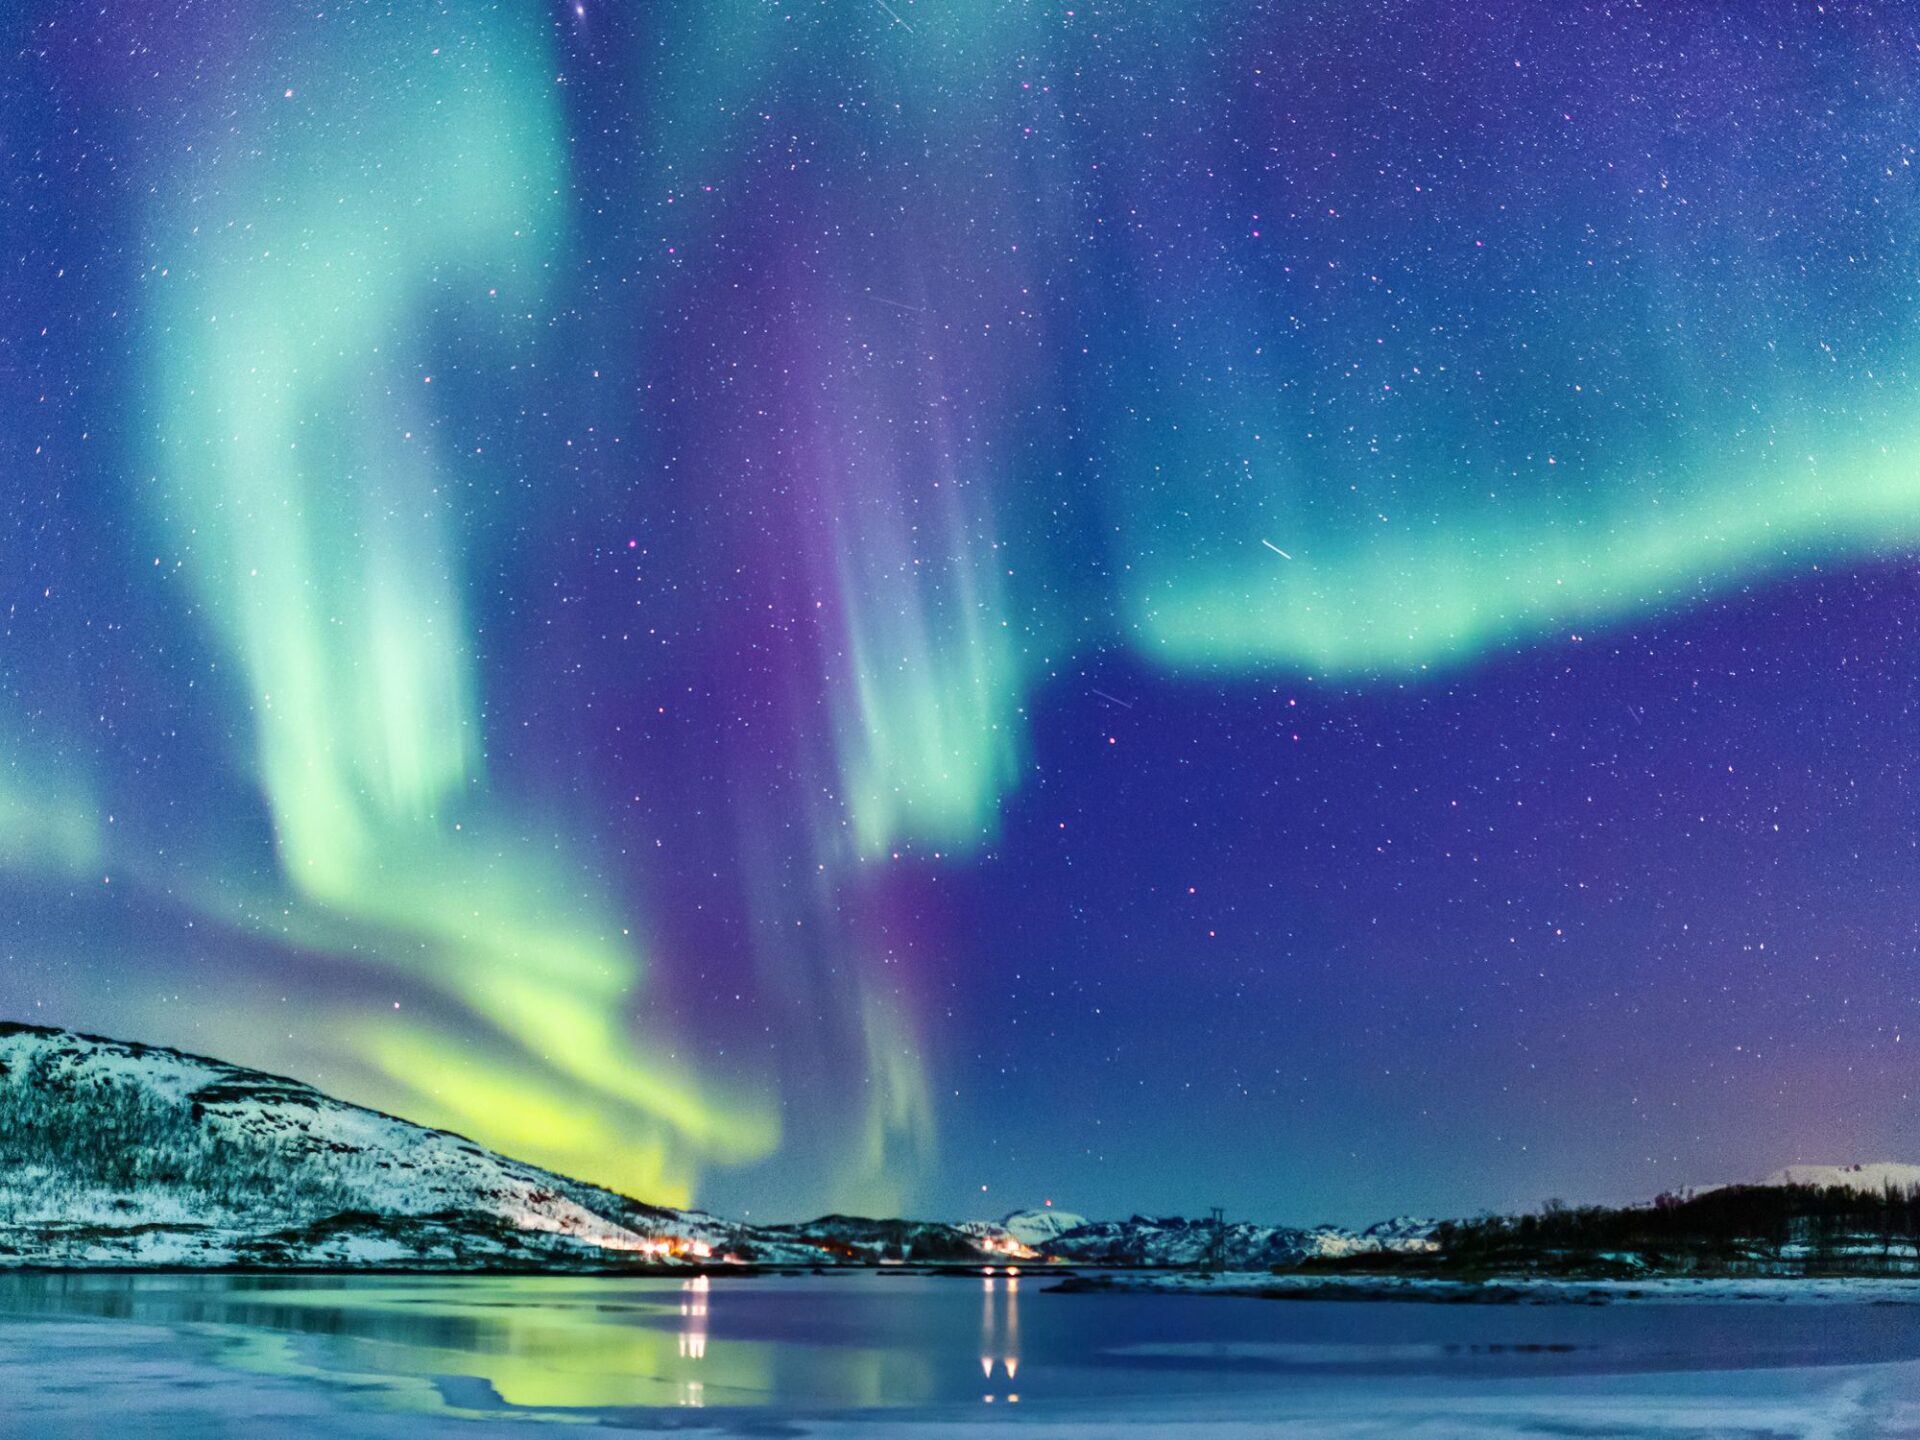 Unique experiences in Scandinavia - Northern lights in Lapland